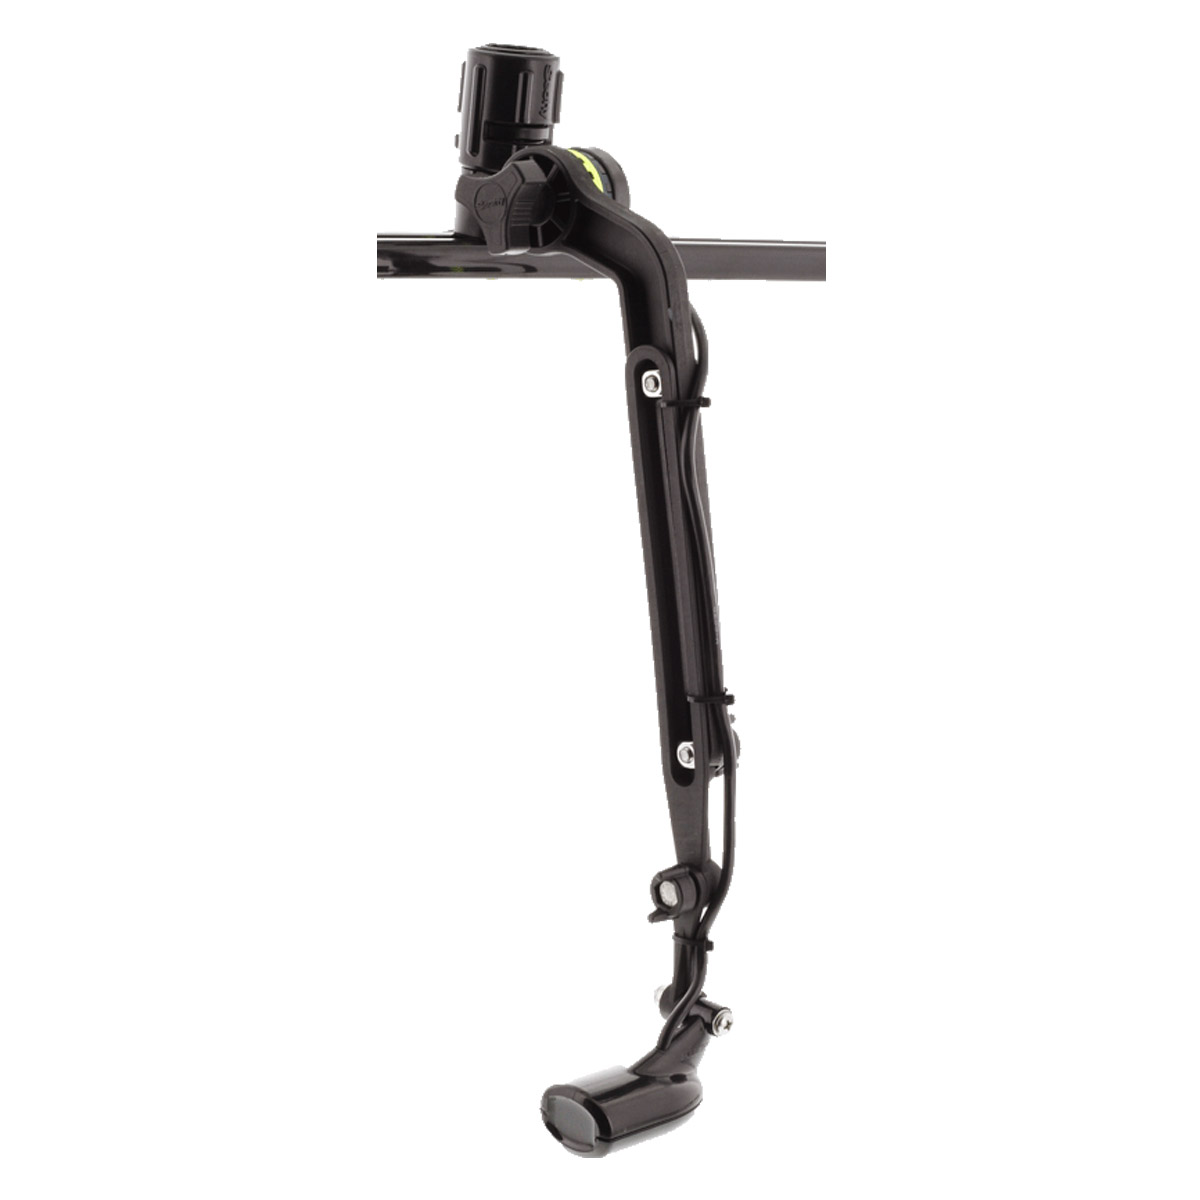 Scotty Kayak Transducer Arm Mount With Adapter